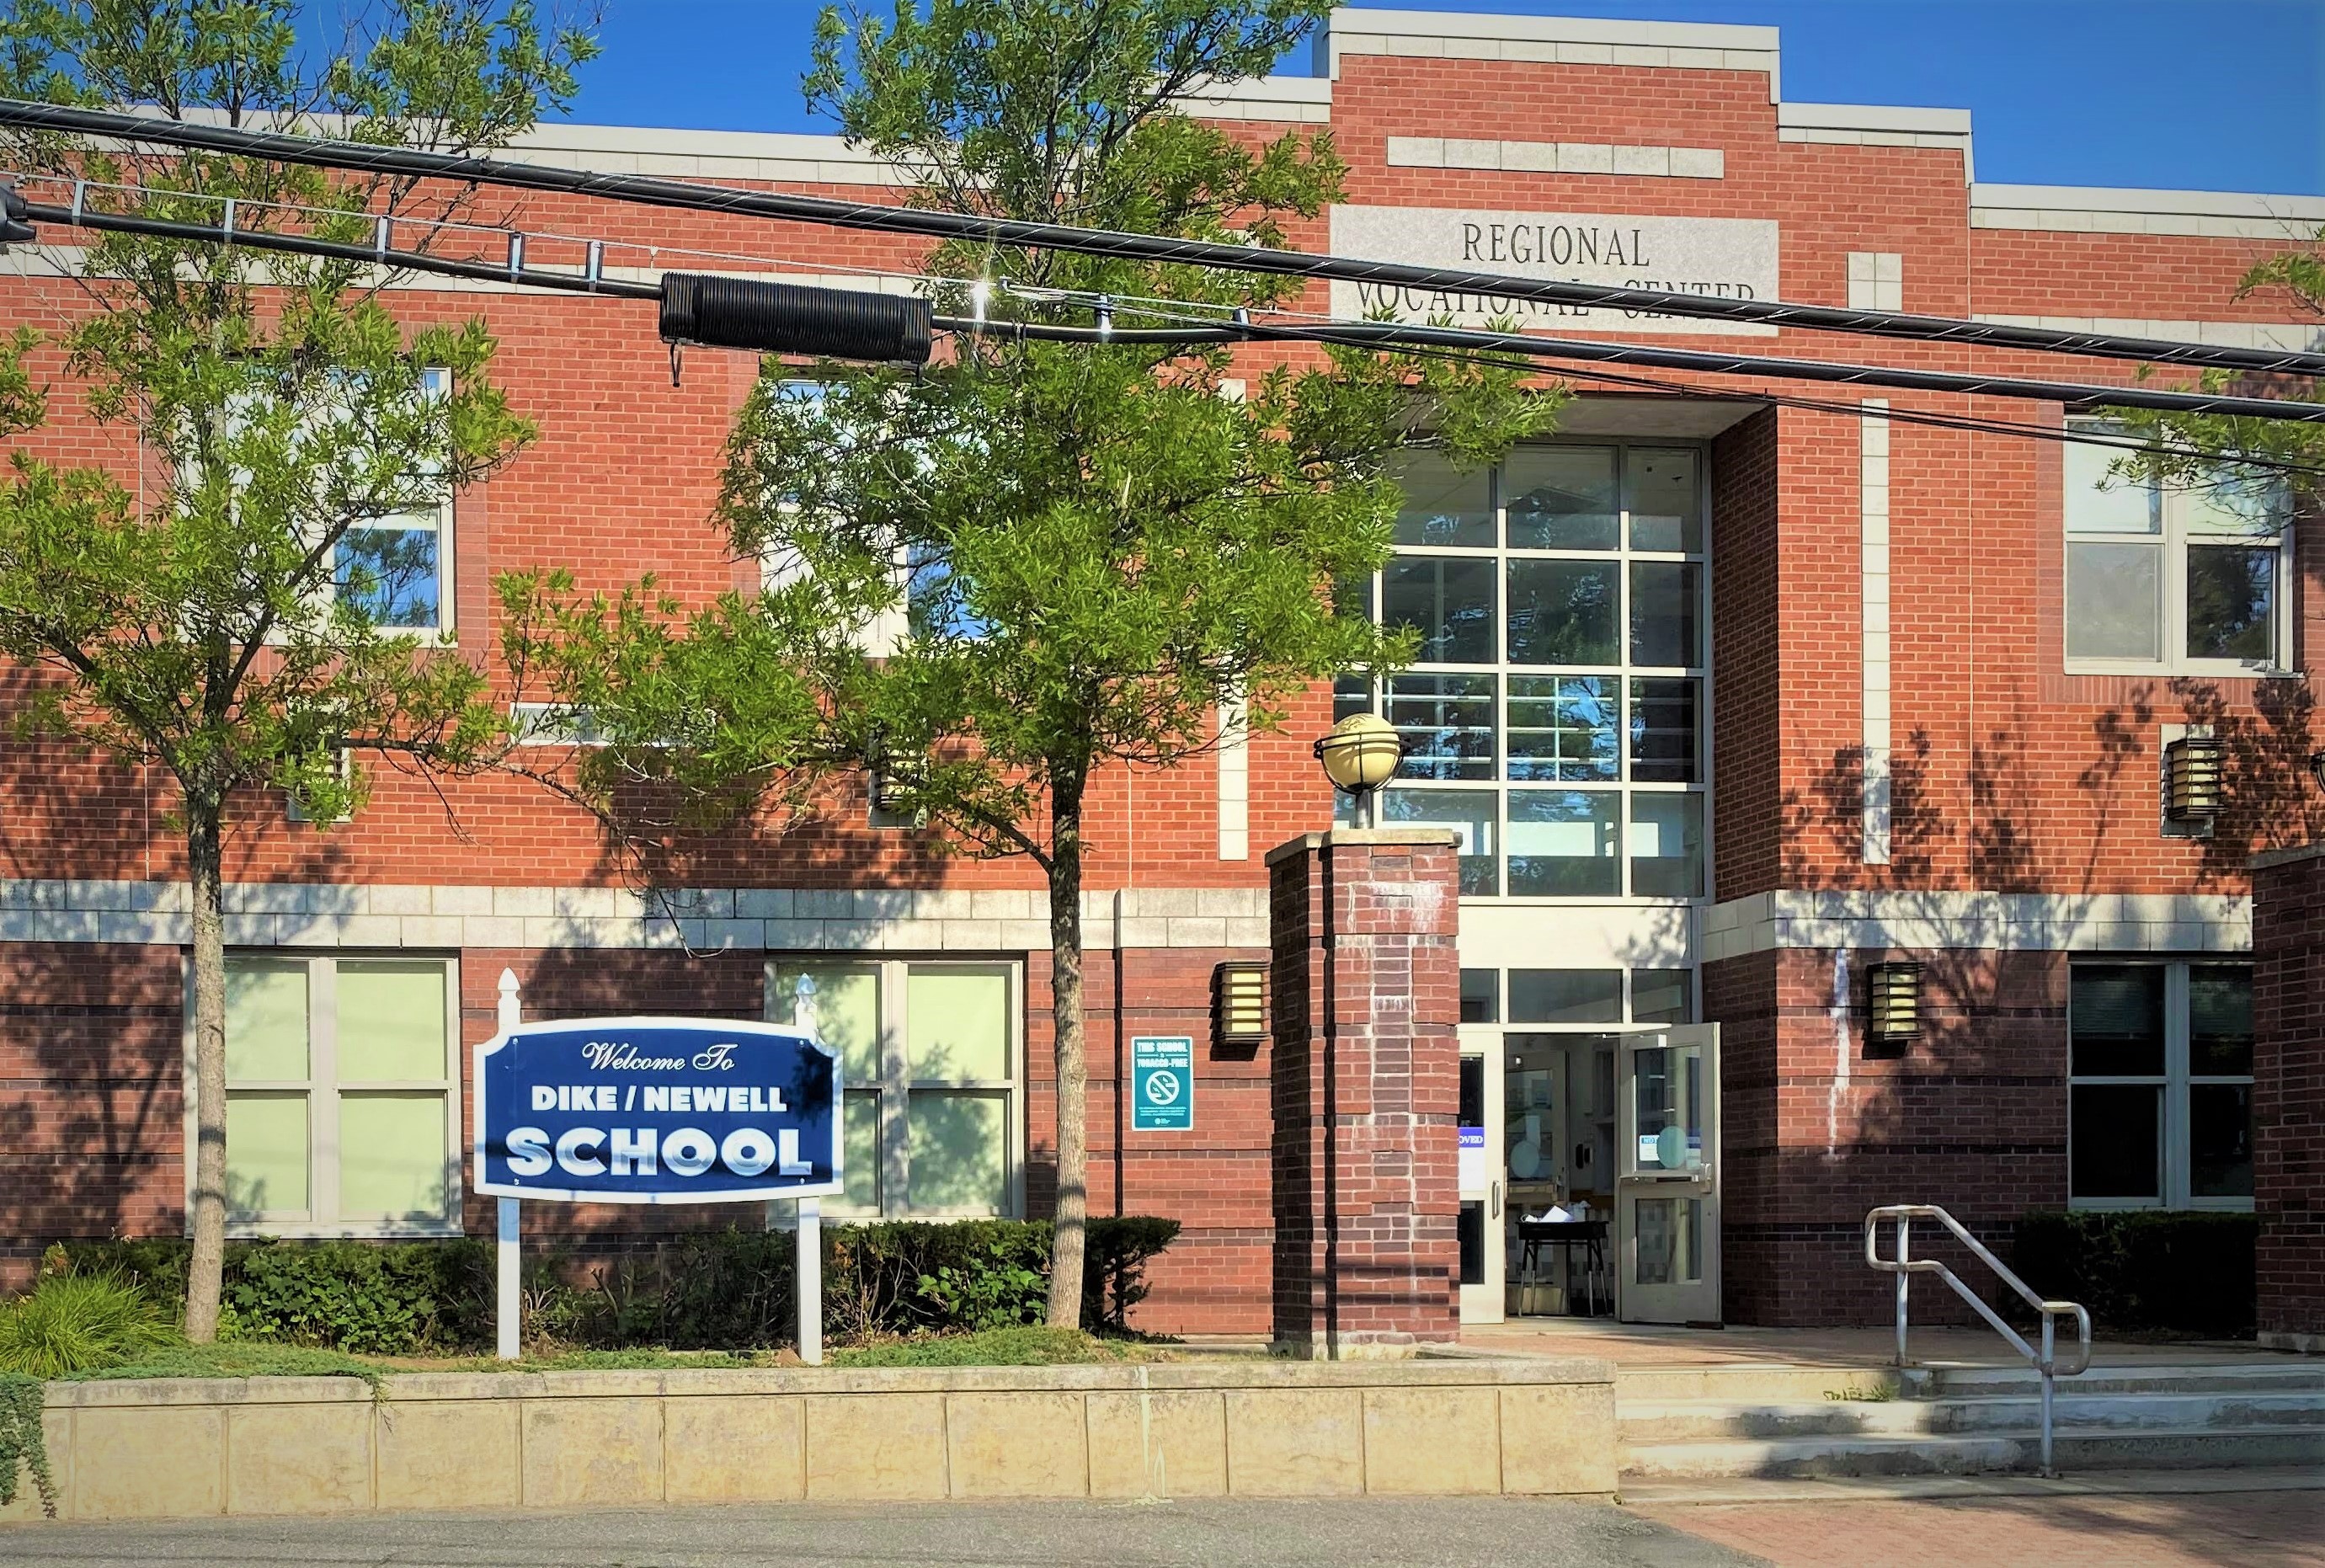 The old Dike Newell School sign installed at BRCTC 800 High Street